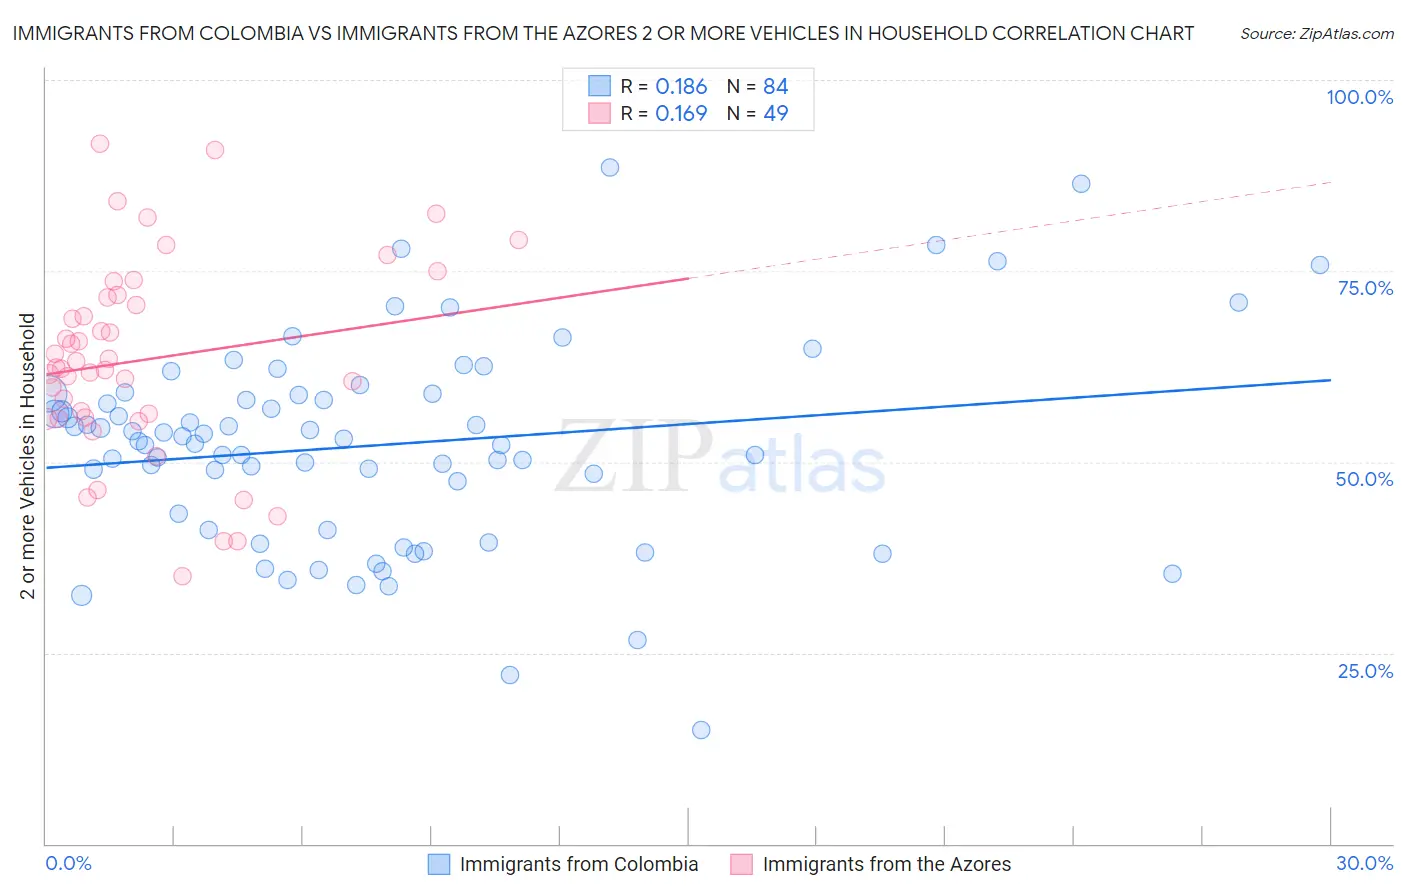 Immigrants from Colombia vs Immigrants from the Azores 2 or more Vehicles in Household